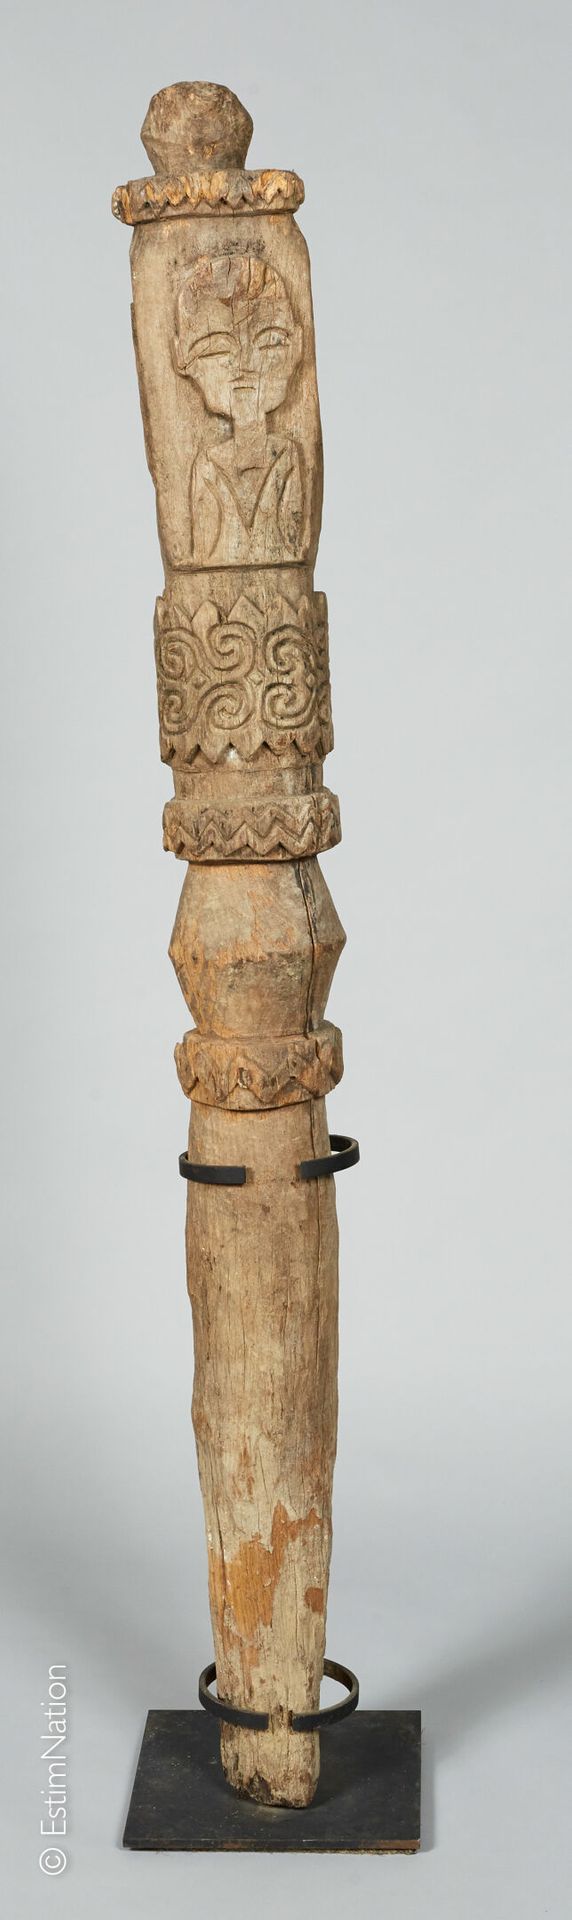 SUMATRA SUMATRA



Carved wooden post surmounted by a protrusion decorated with &hellip;